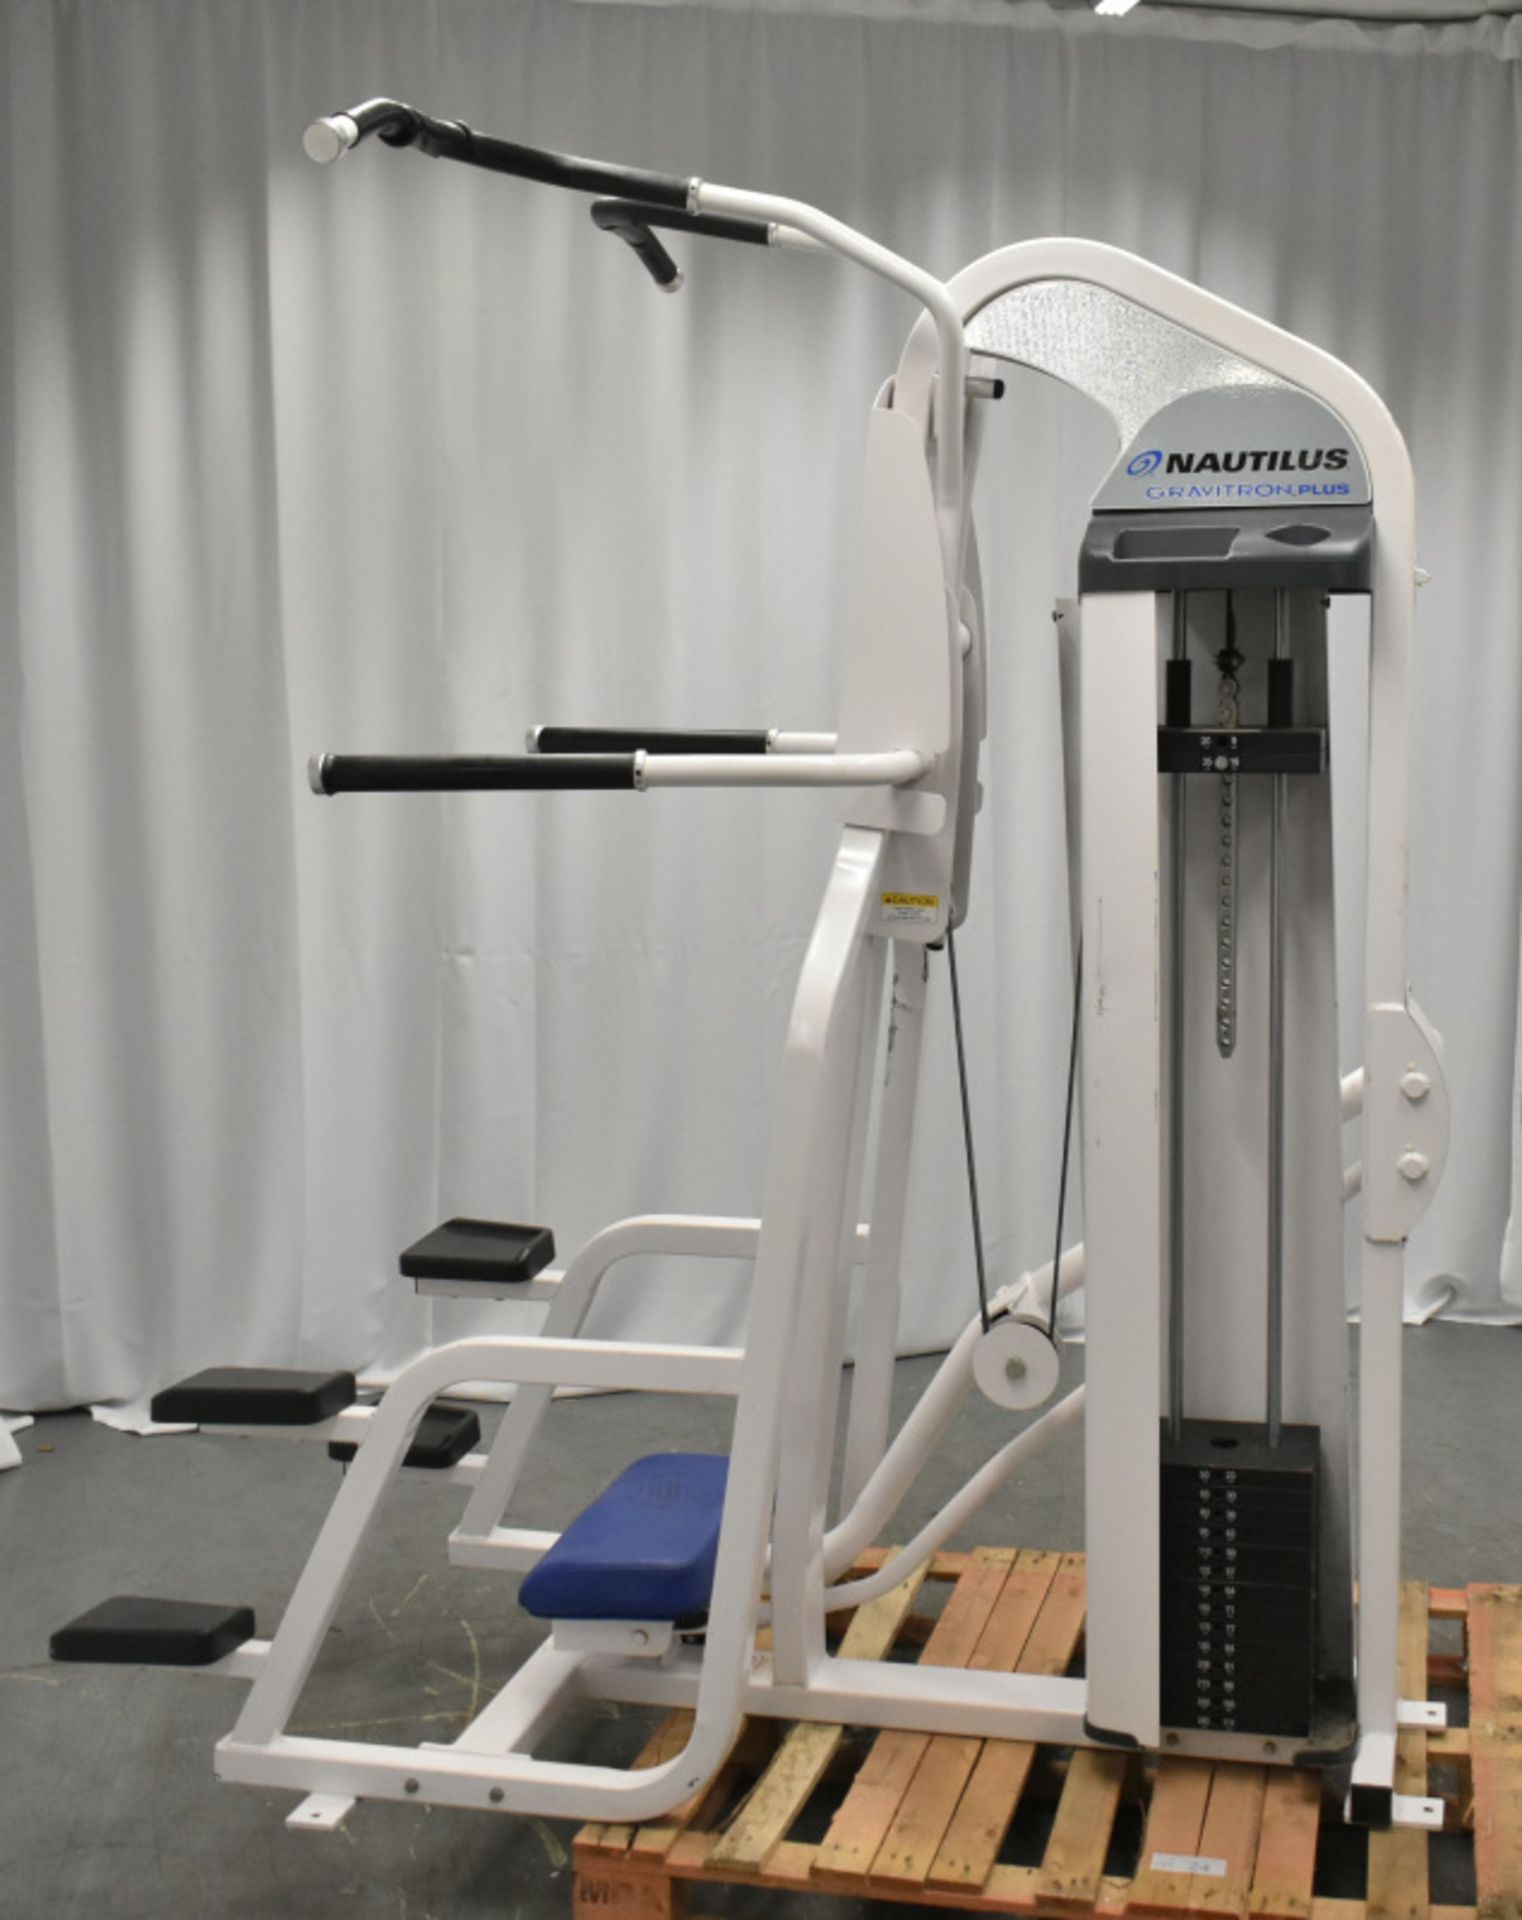 Nautilus Gravitron Plus Weight Assisted Chin Dip Machine - See pictures for condition